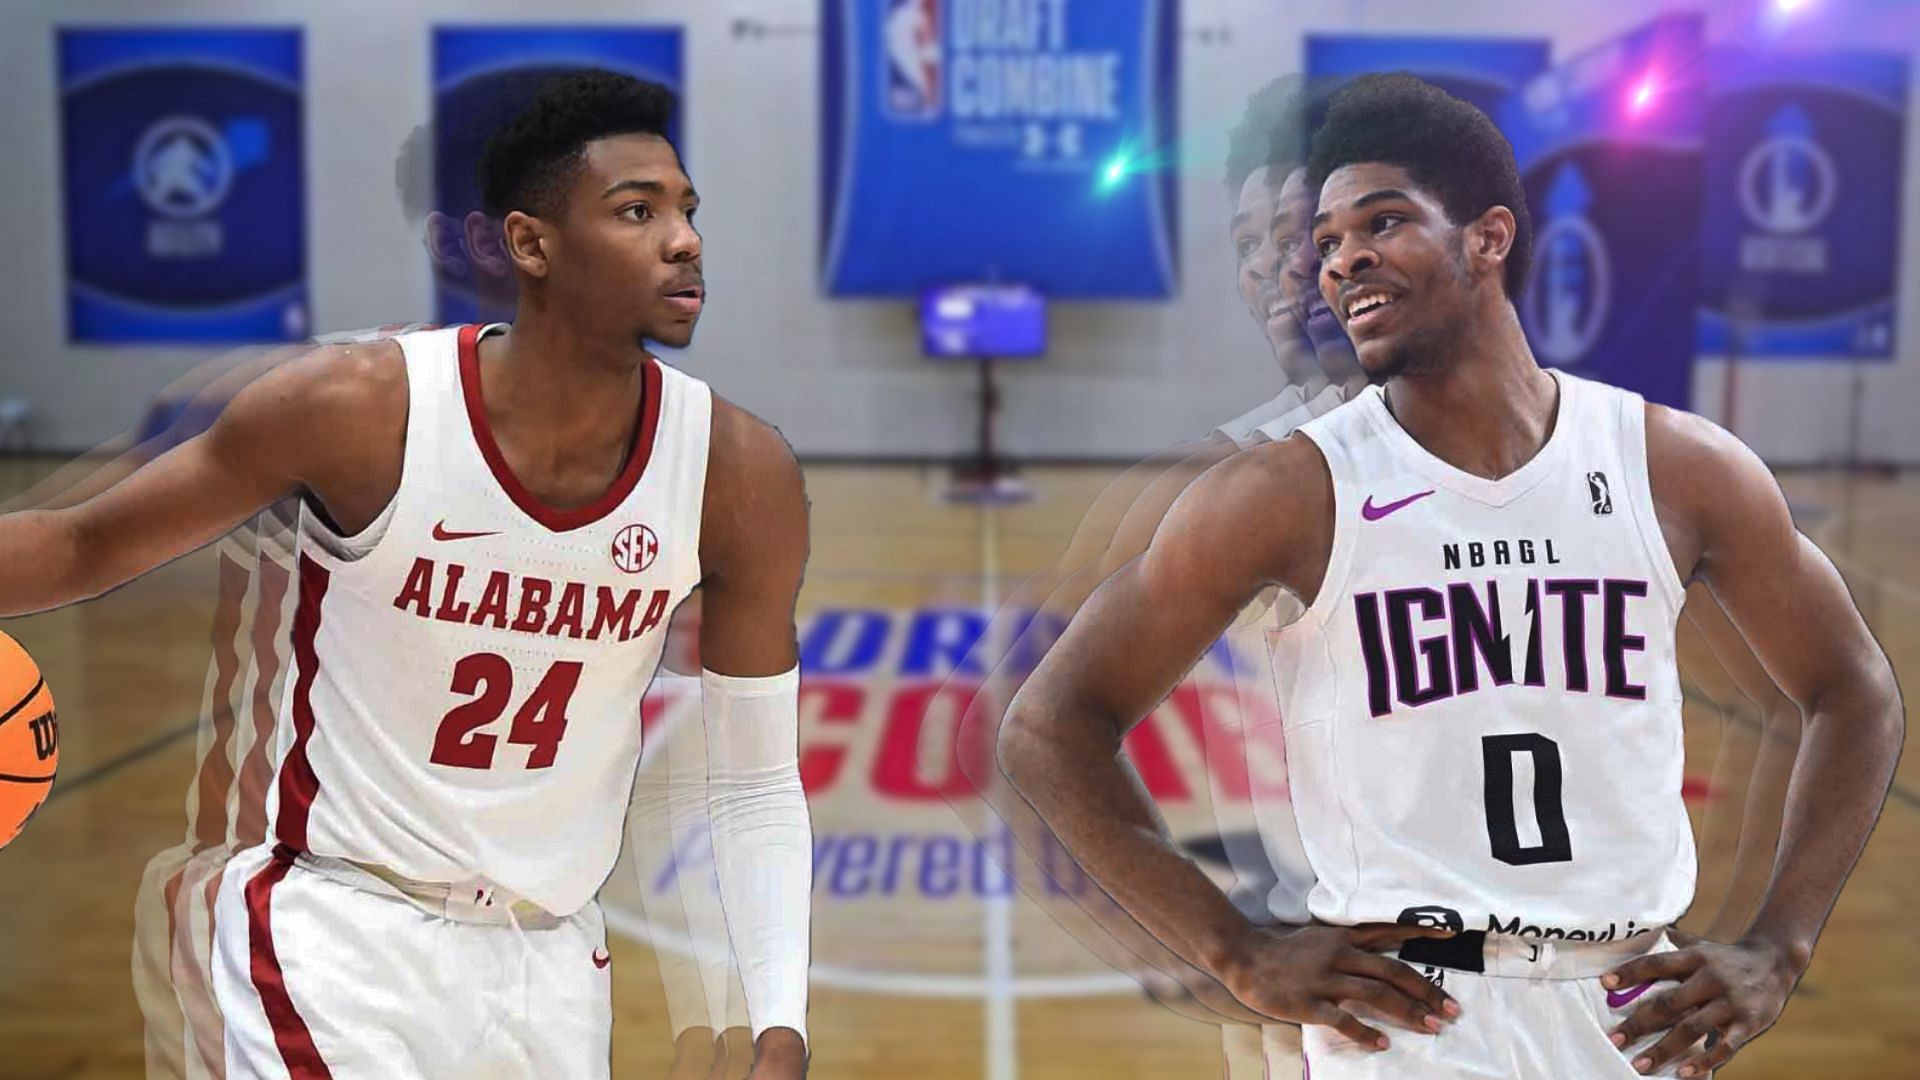 NBA Draft Combine 2023 will feature some of the best young players in the world (Image via Sportskeeda)